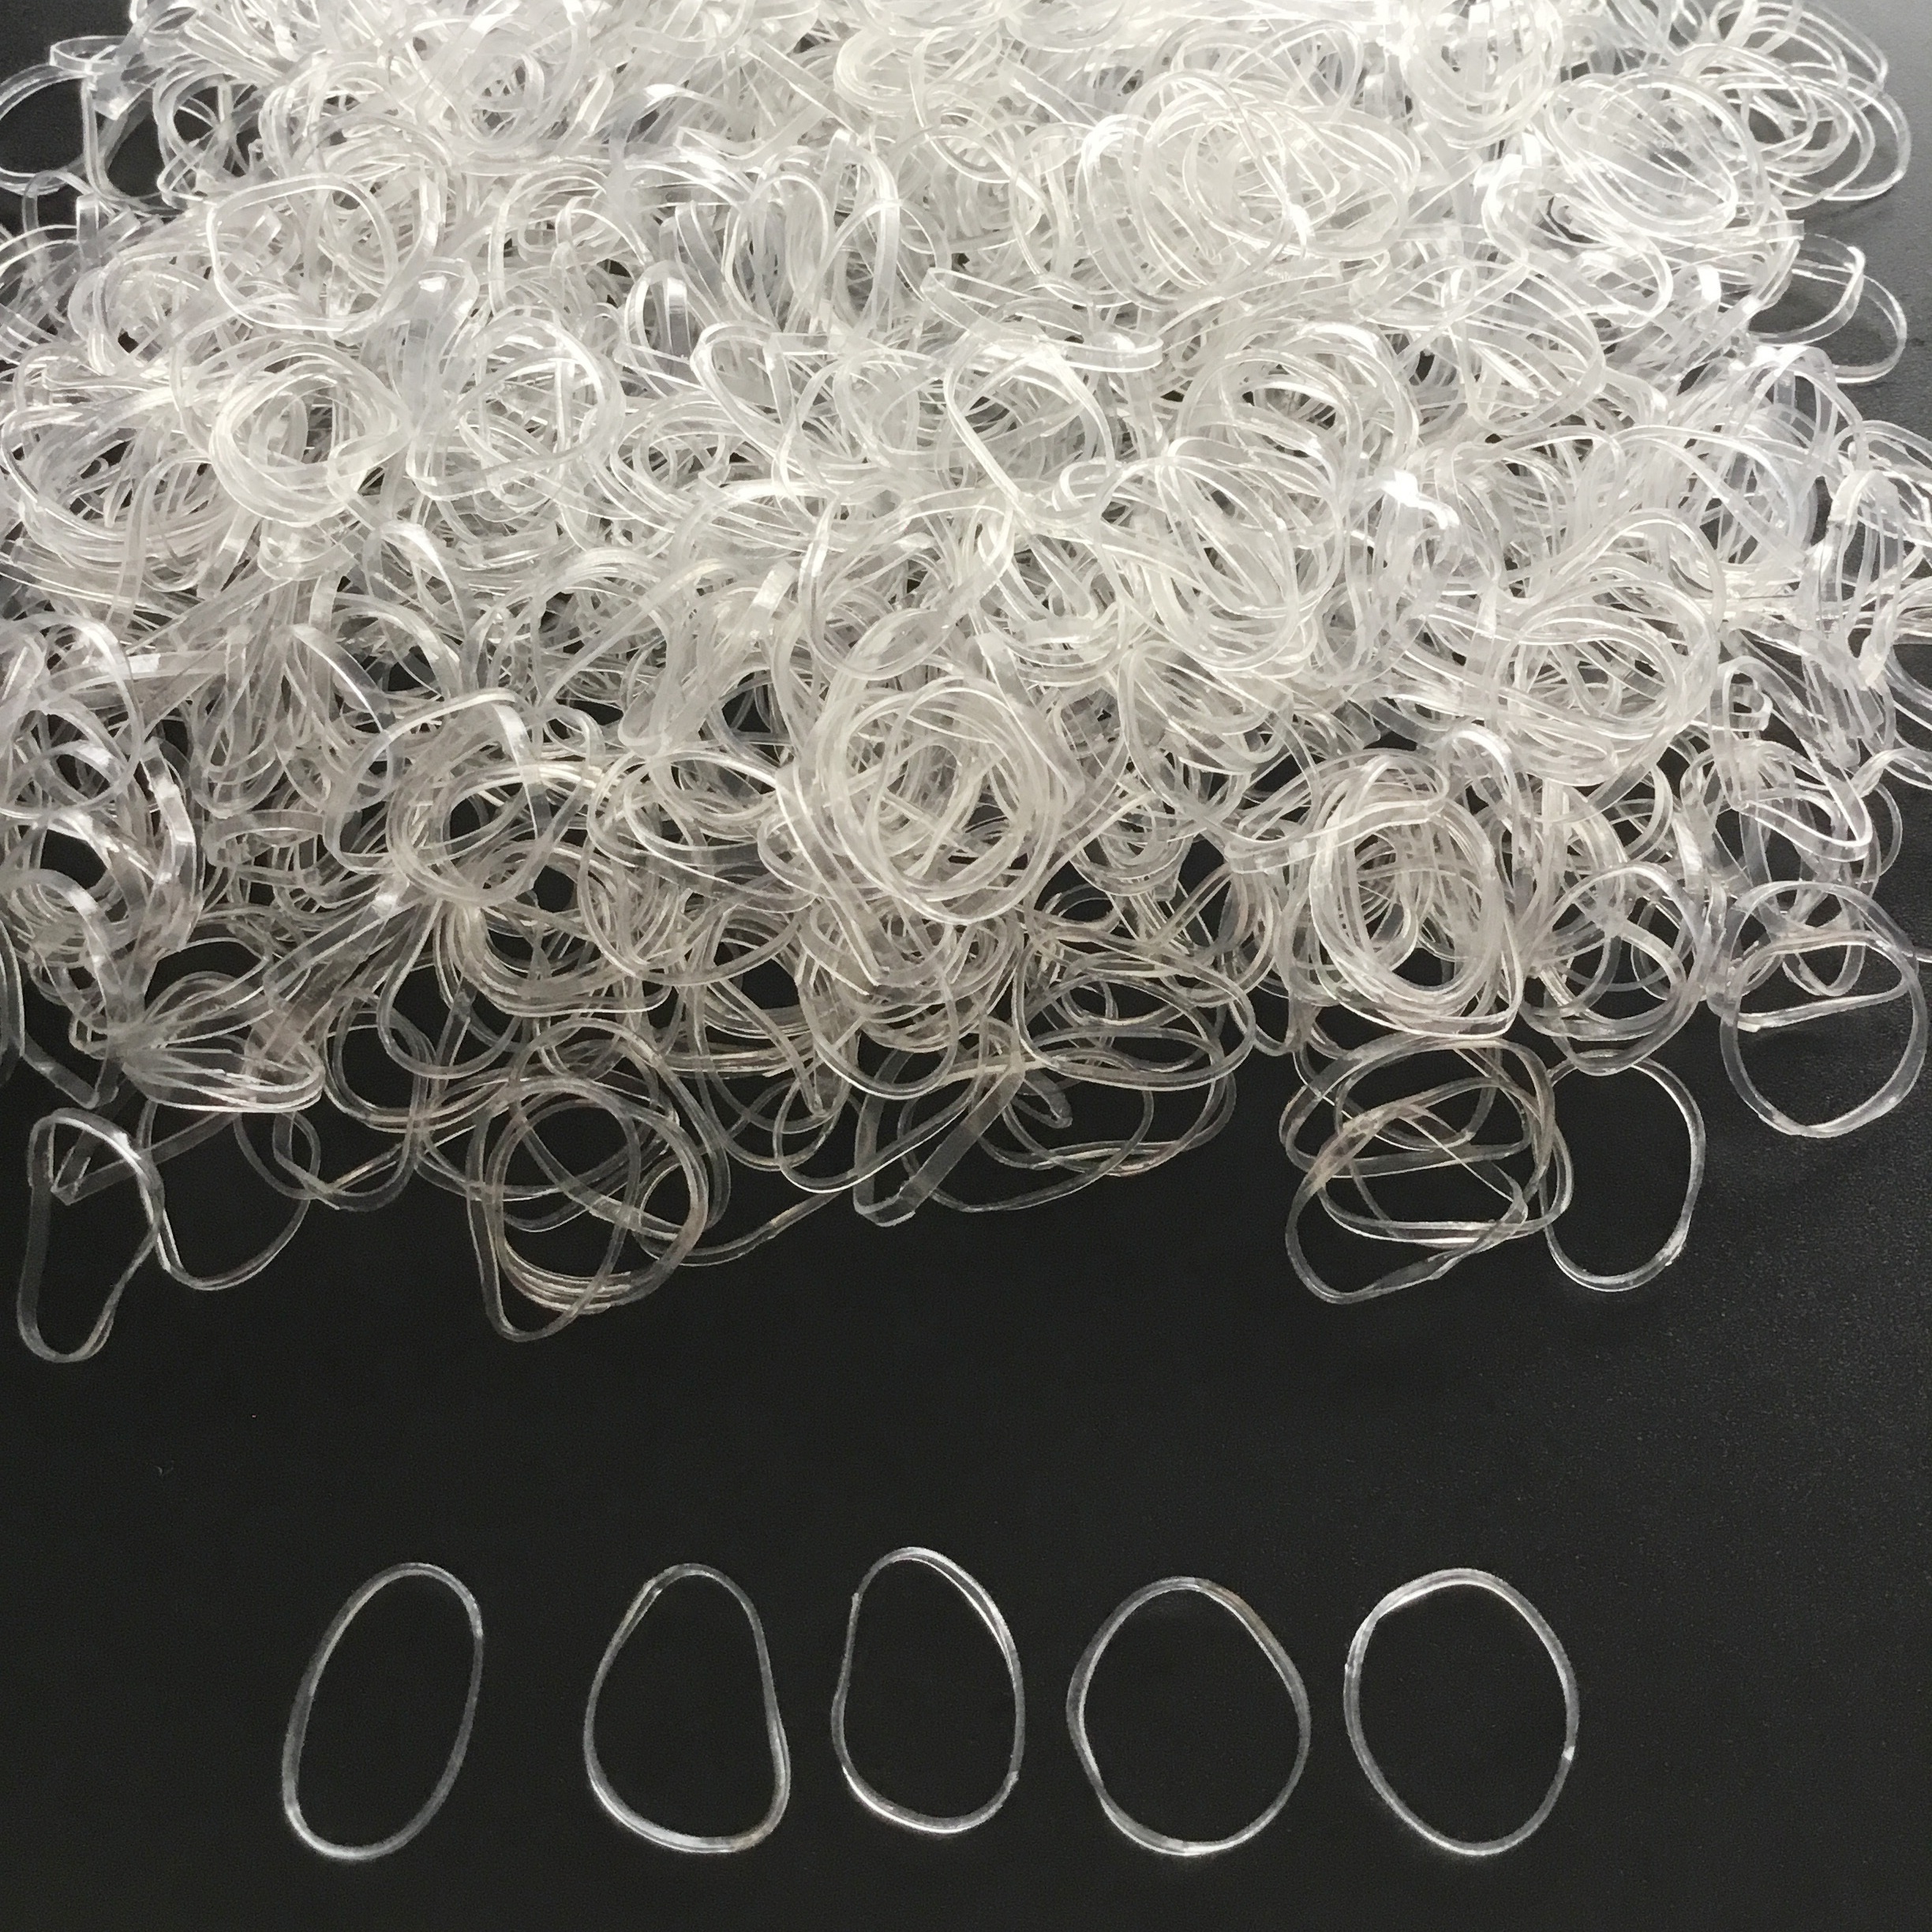 Mini Rubber Bands 1500 pcs Soft Elastic Bands Small Tiny Rubber Bands for  Kids Hair, Braids Hair, Wedding Hairstyle